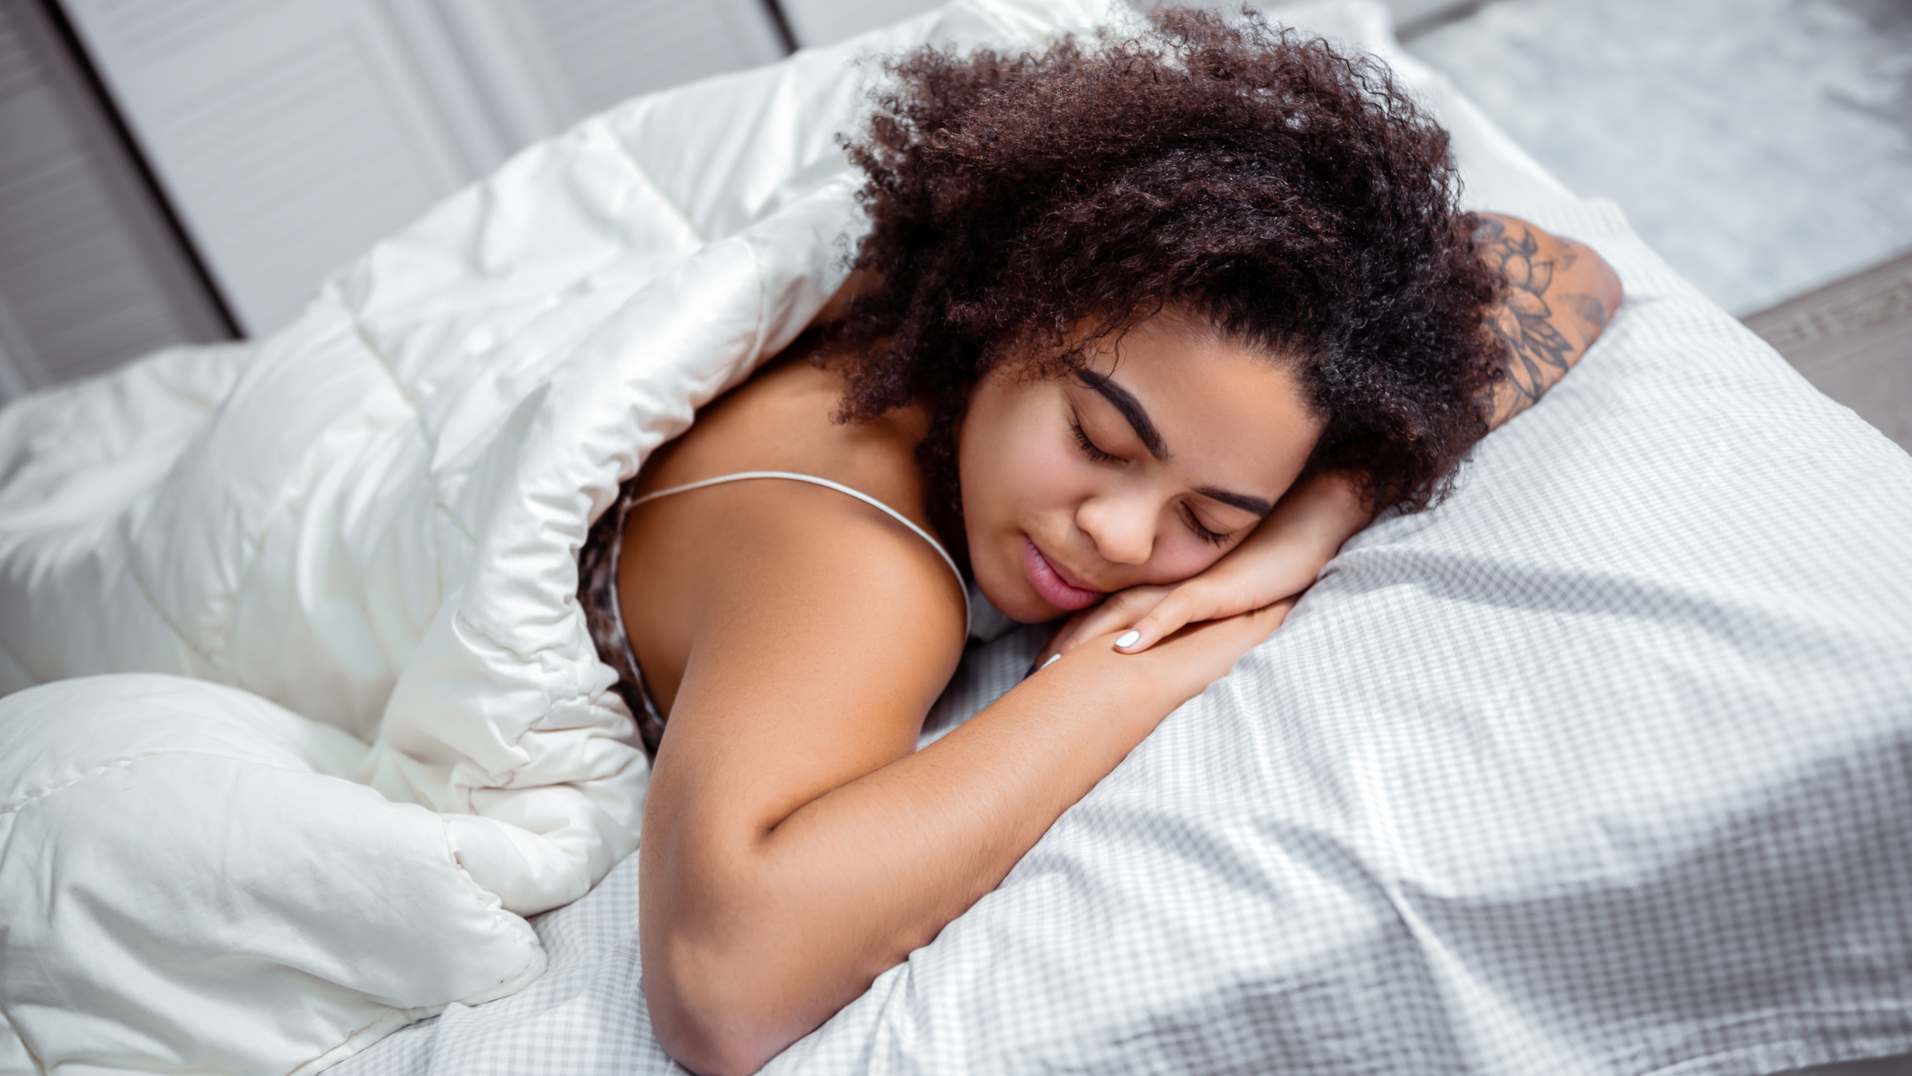 Is sleeping on your front bad for you?